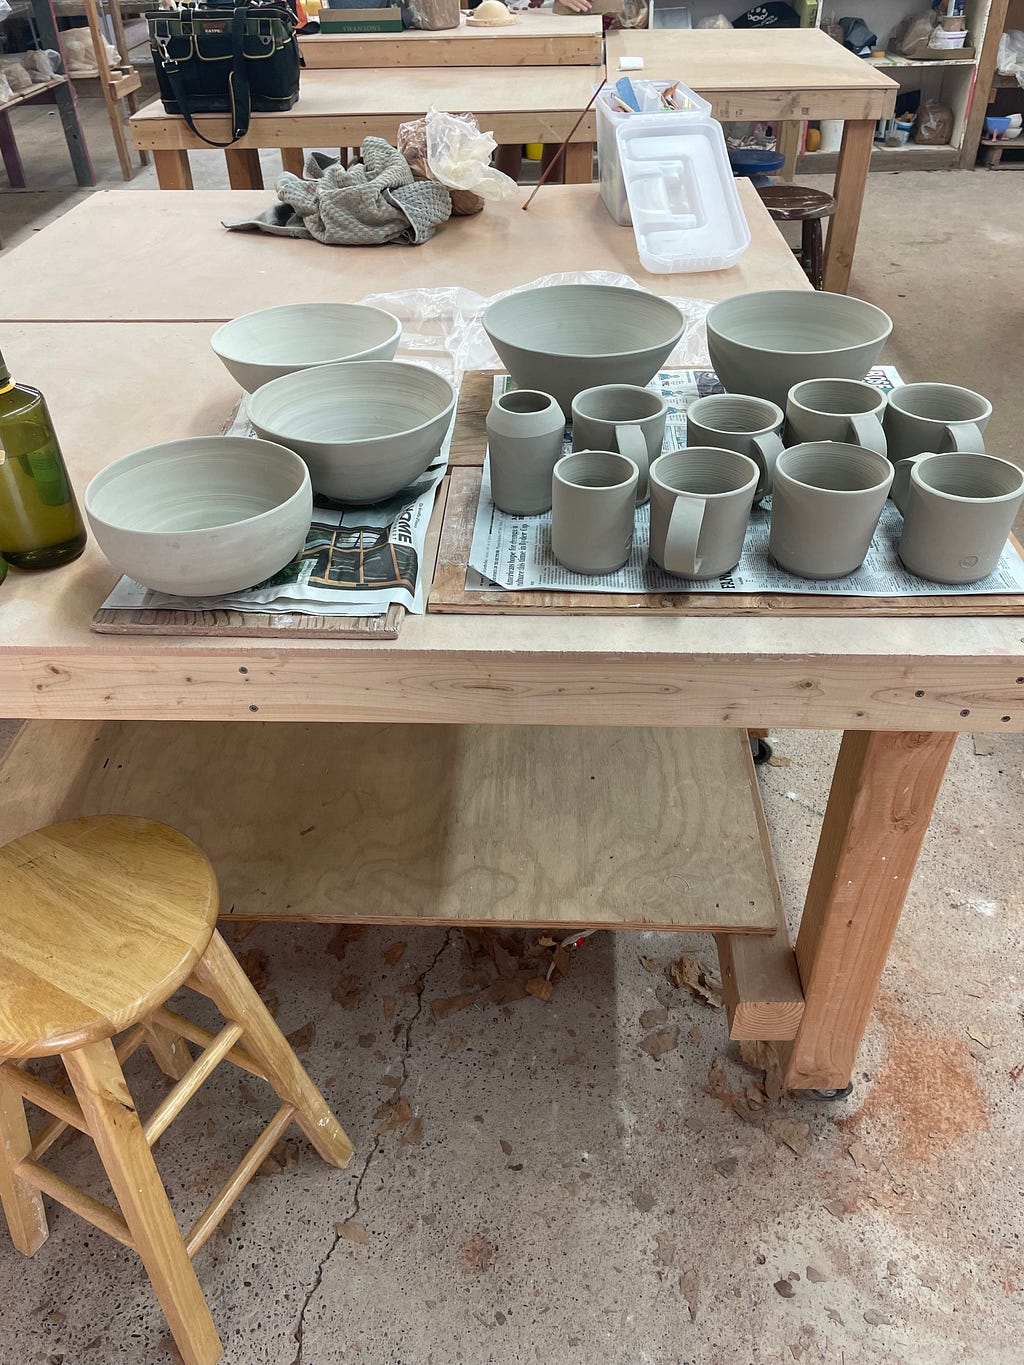 Ceramics drying on a table